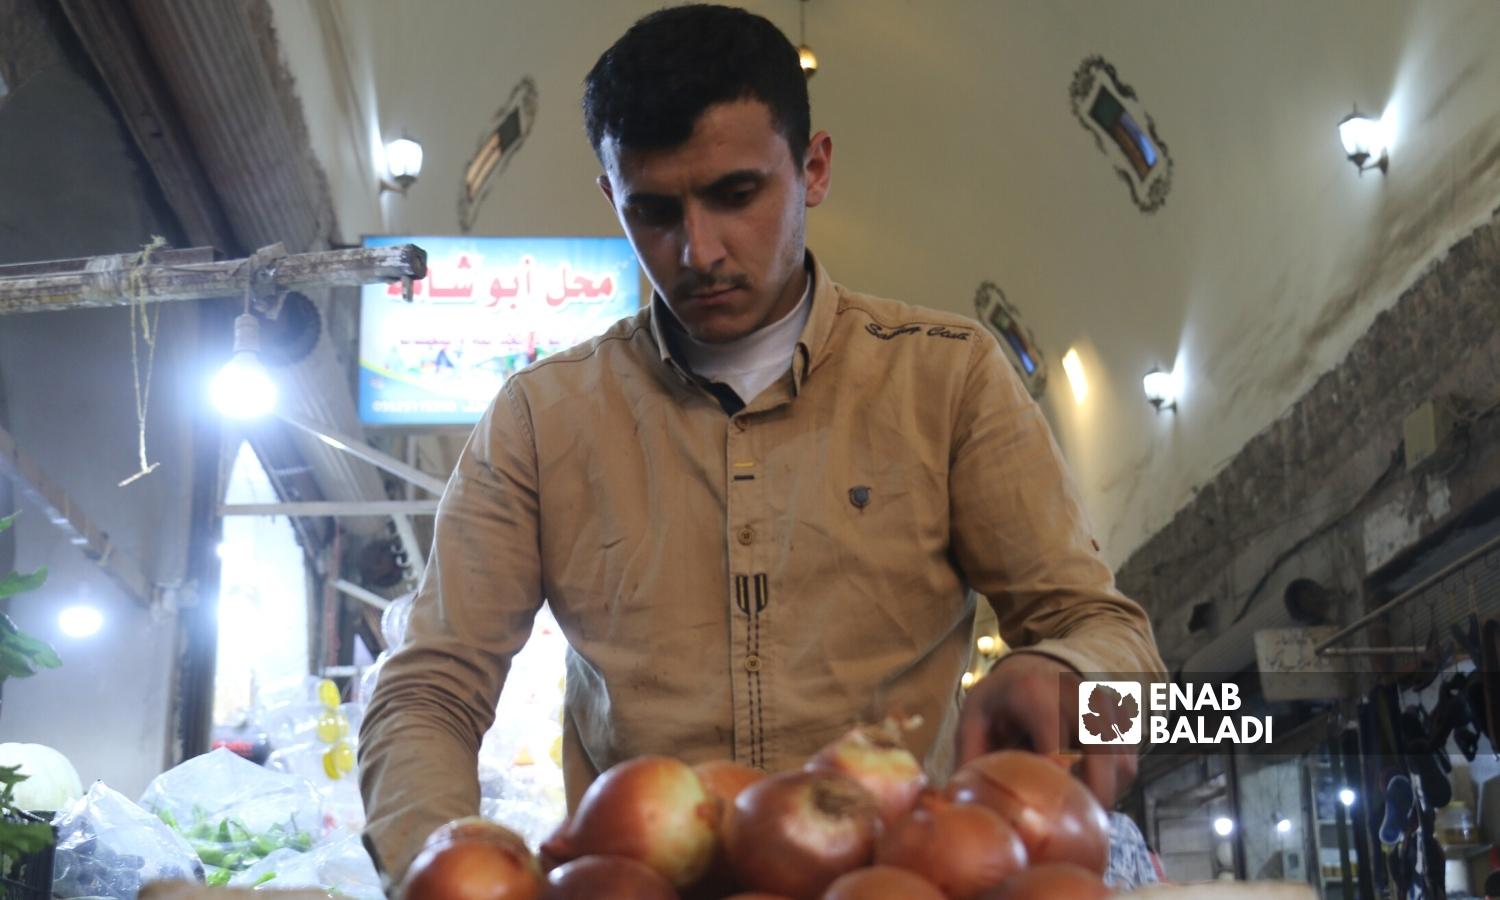 A man buys onions in the covered market of Azaz city in Aleppo’s northern countryside - 02 September 2022 (Enab Baladi/Dayan Junpaz)
